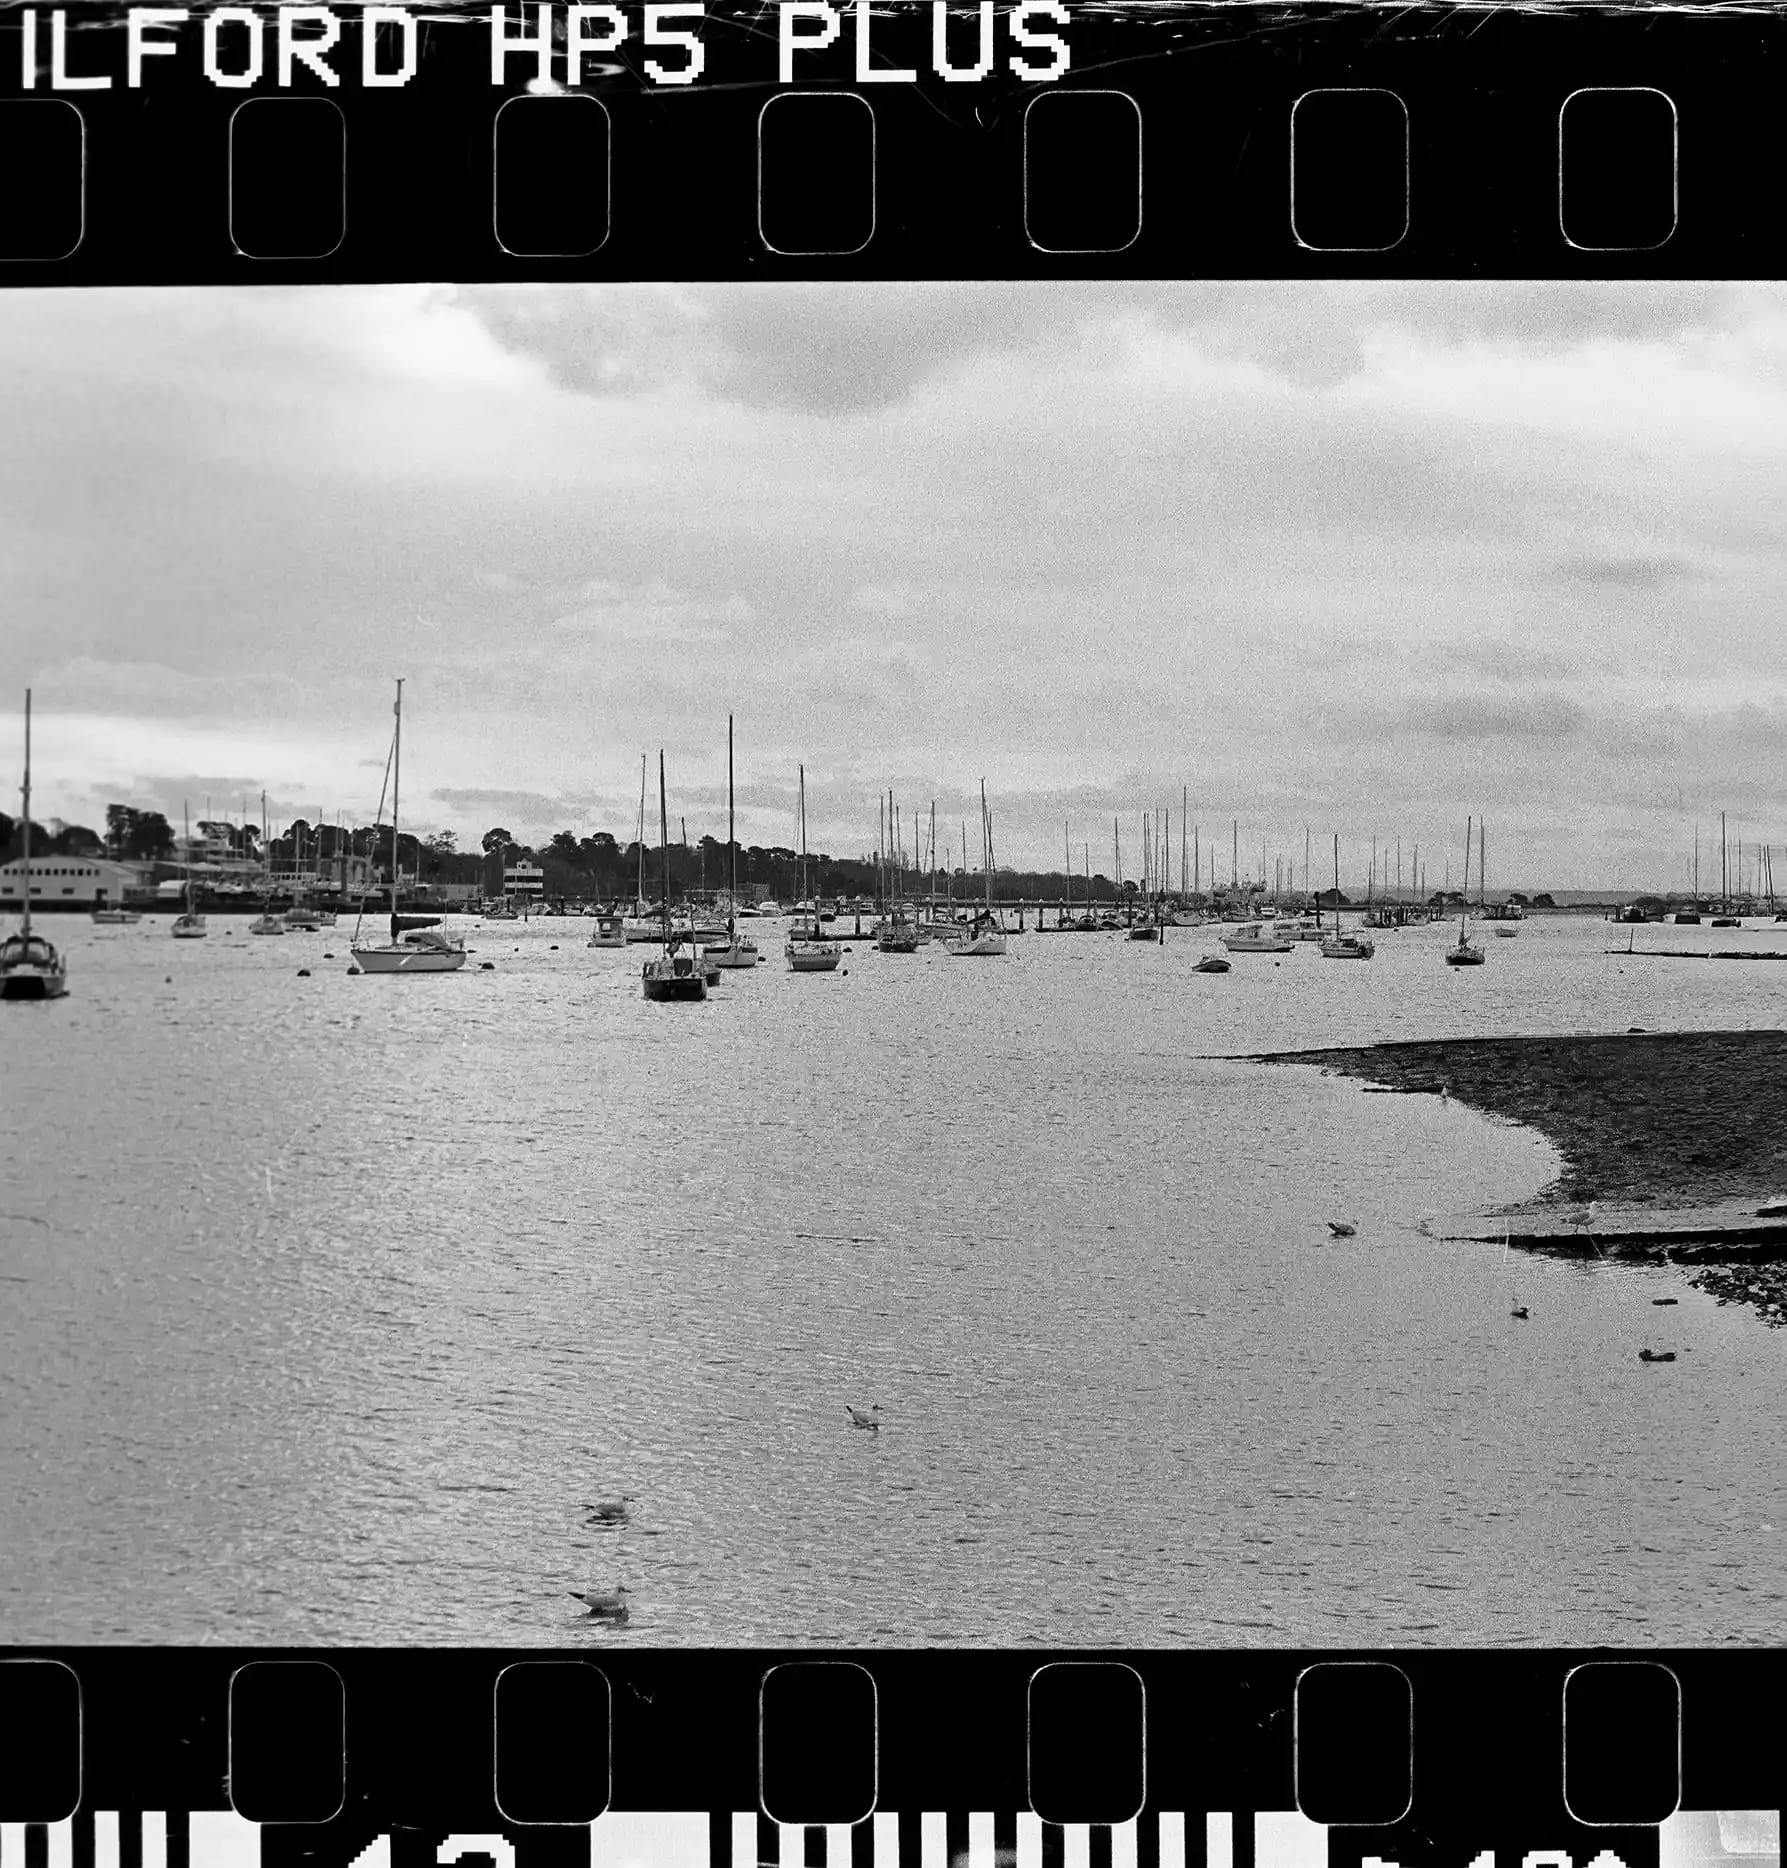 Hamble-le-Rice - Discover a Timeless Photography Charm on 35mm HP5 Film